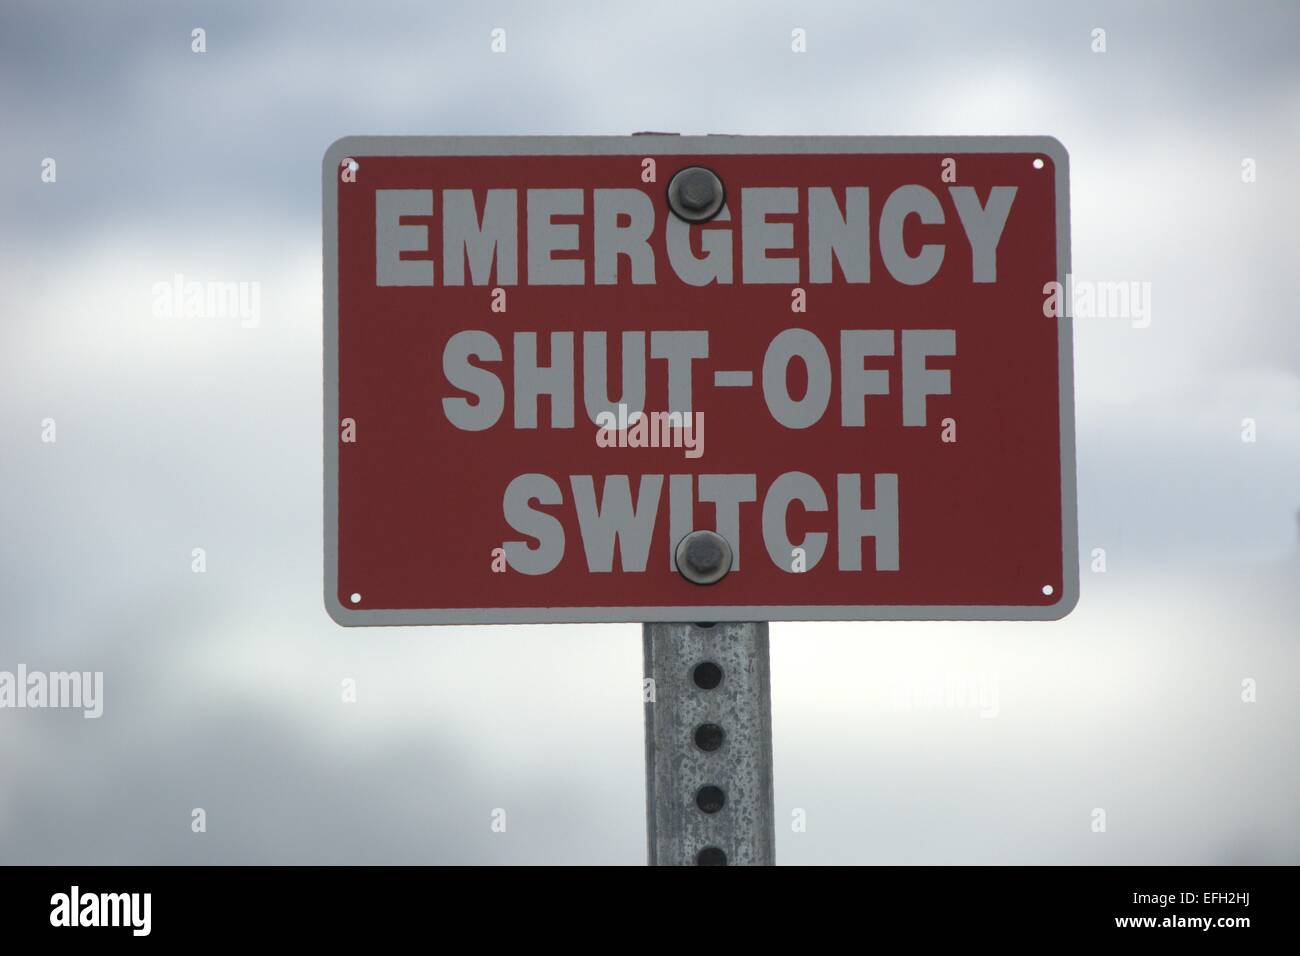 Emergency cut-off switch sign Stock Photo